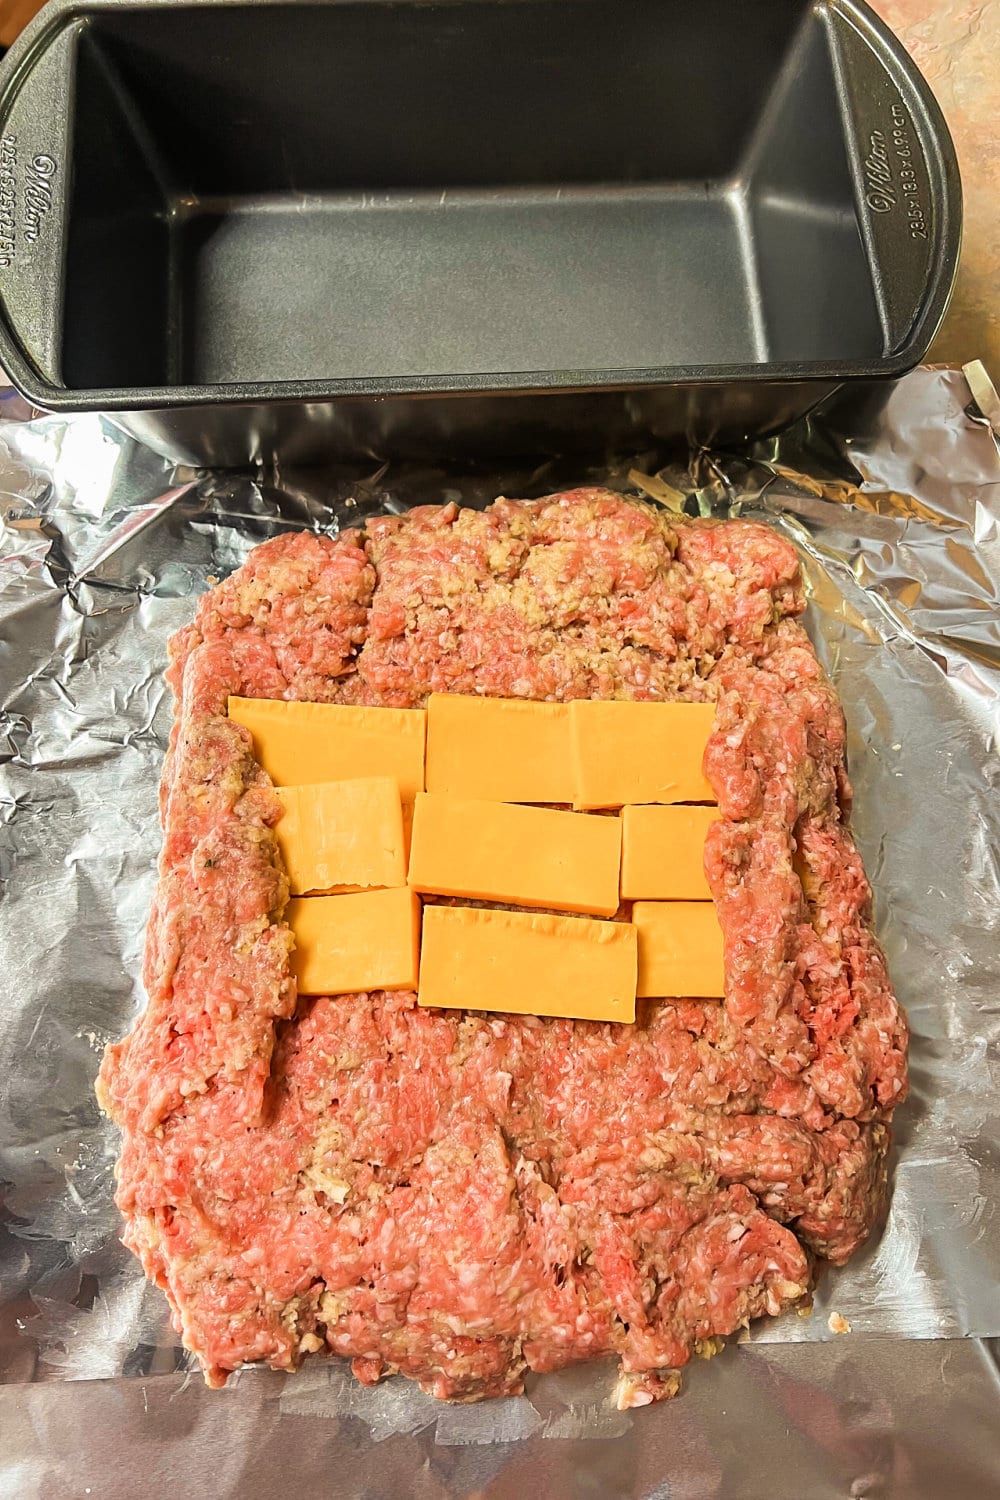 Meatloaf mixture patted out with sliced cheese on top for stuffing.